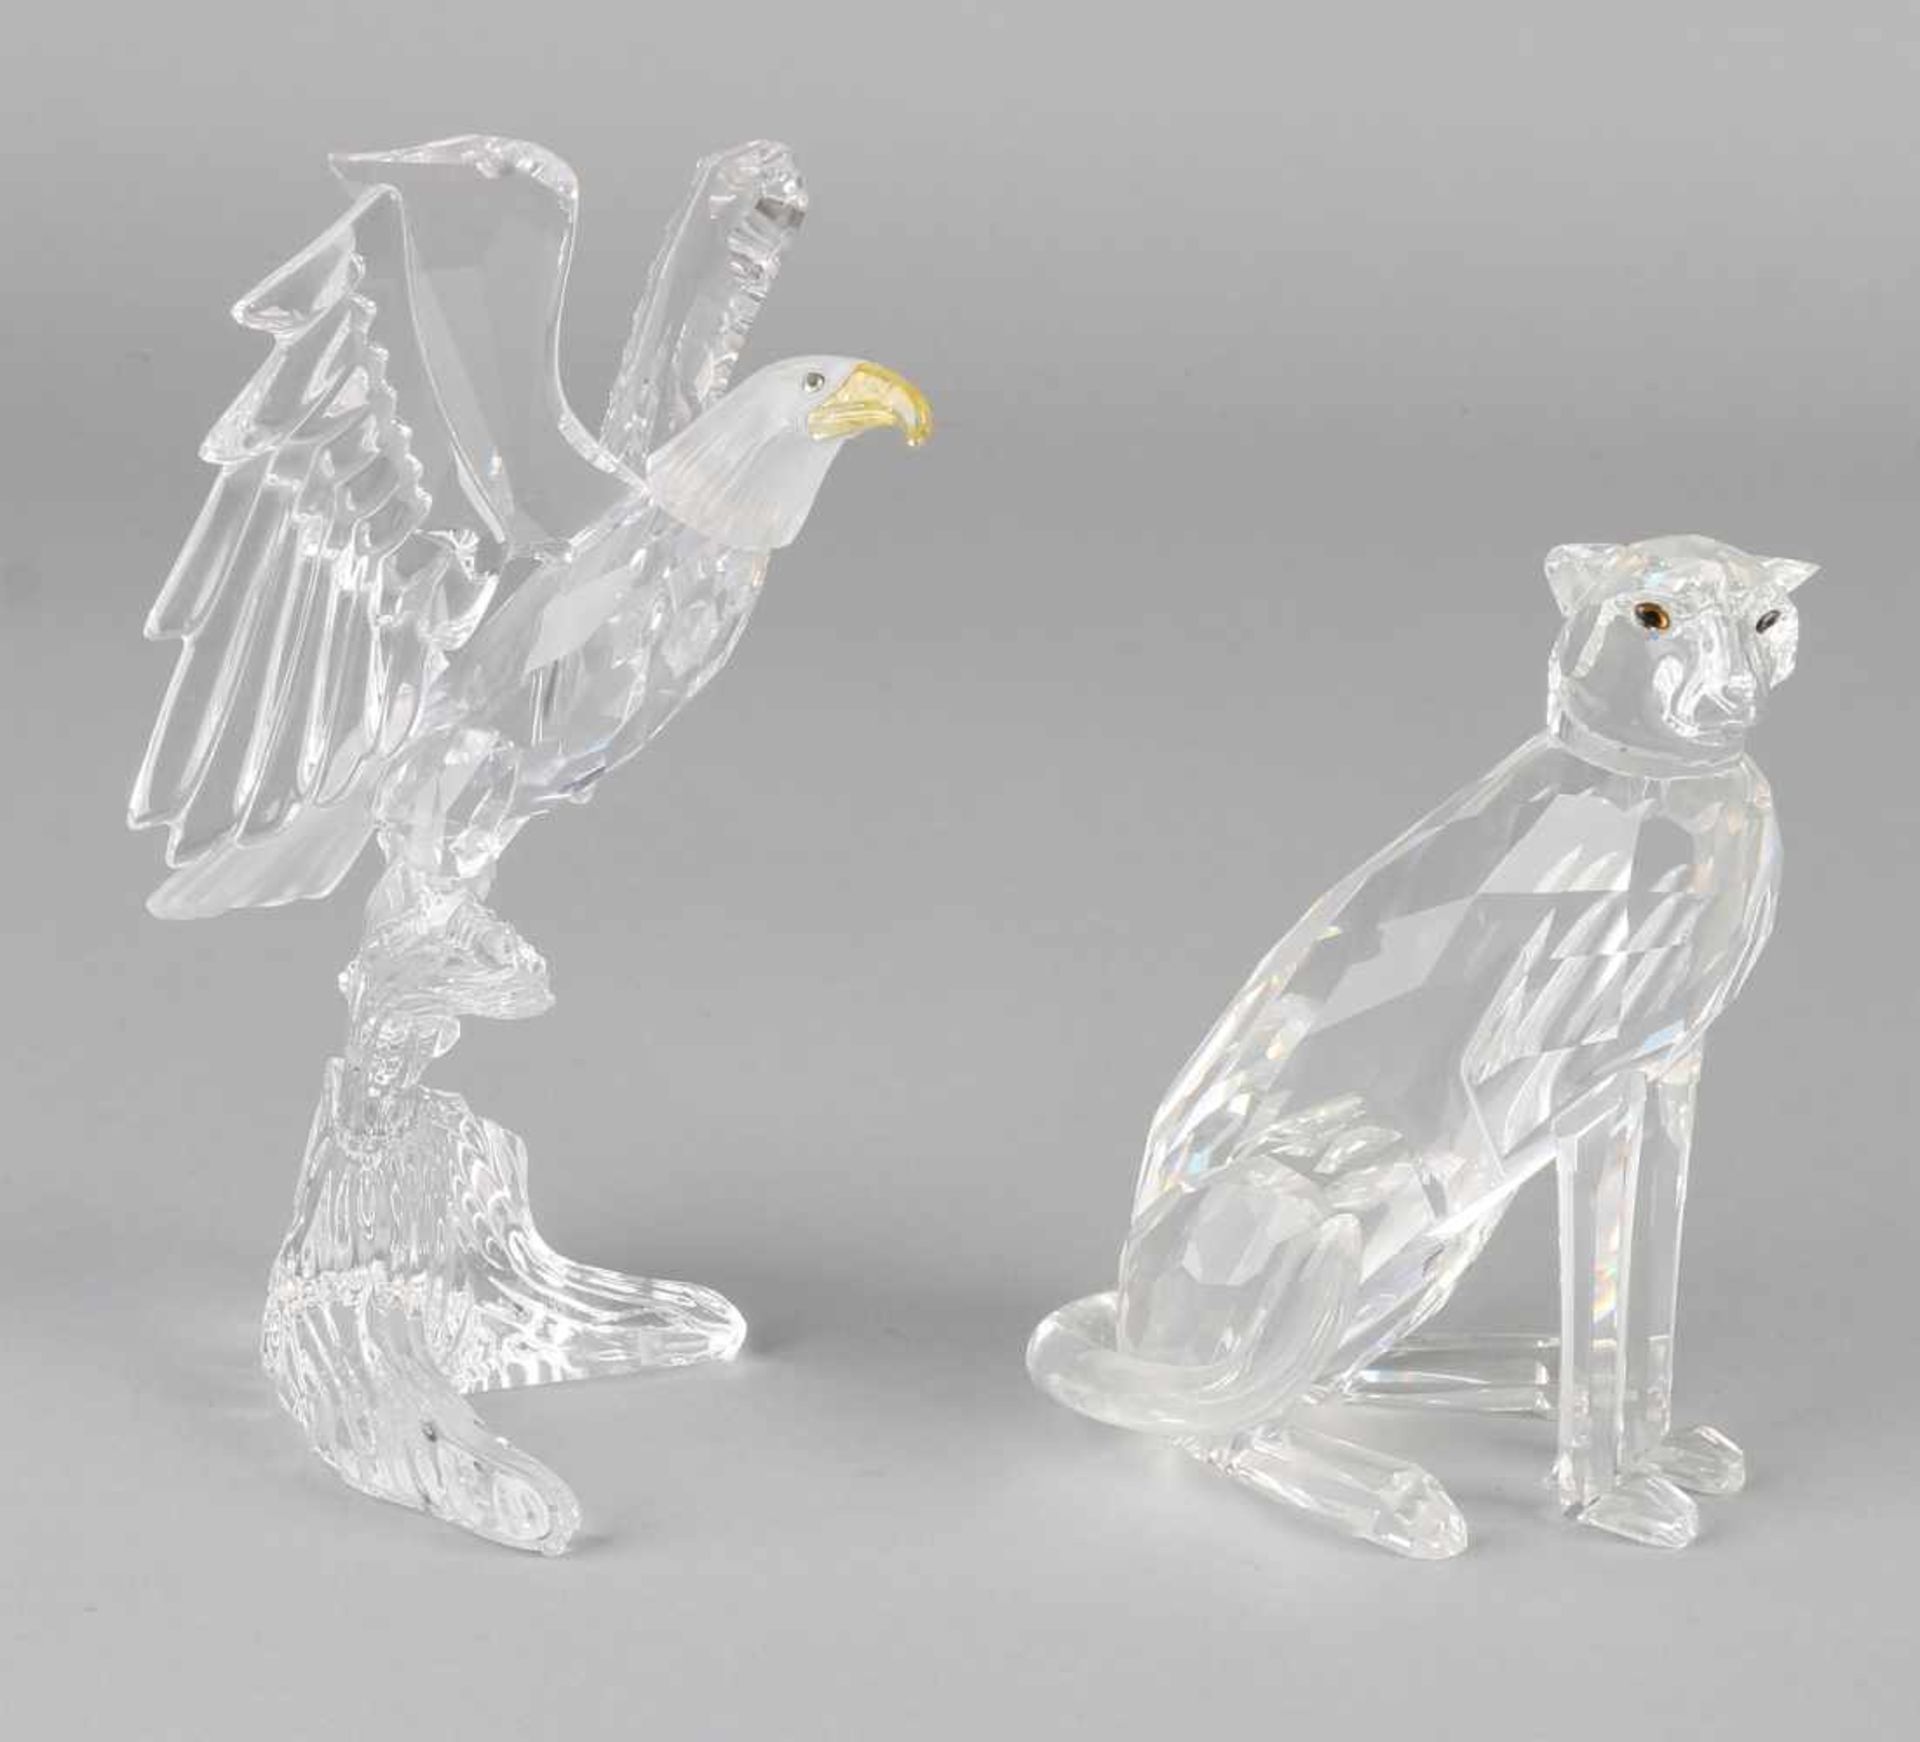 Two parts Swarovski in good condition and with original boxes: 1x Cheetah (183,225) is carried out